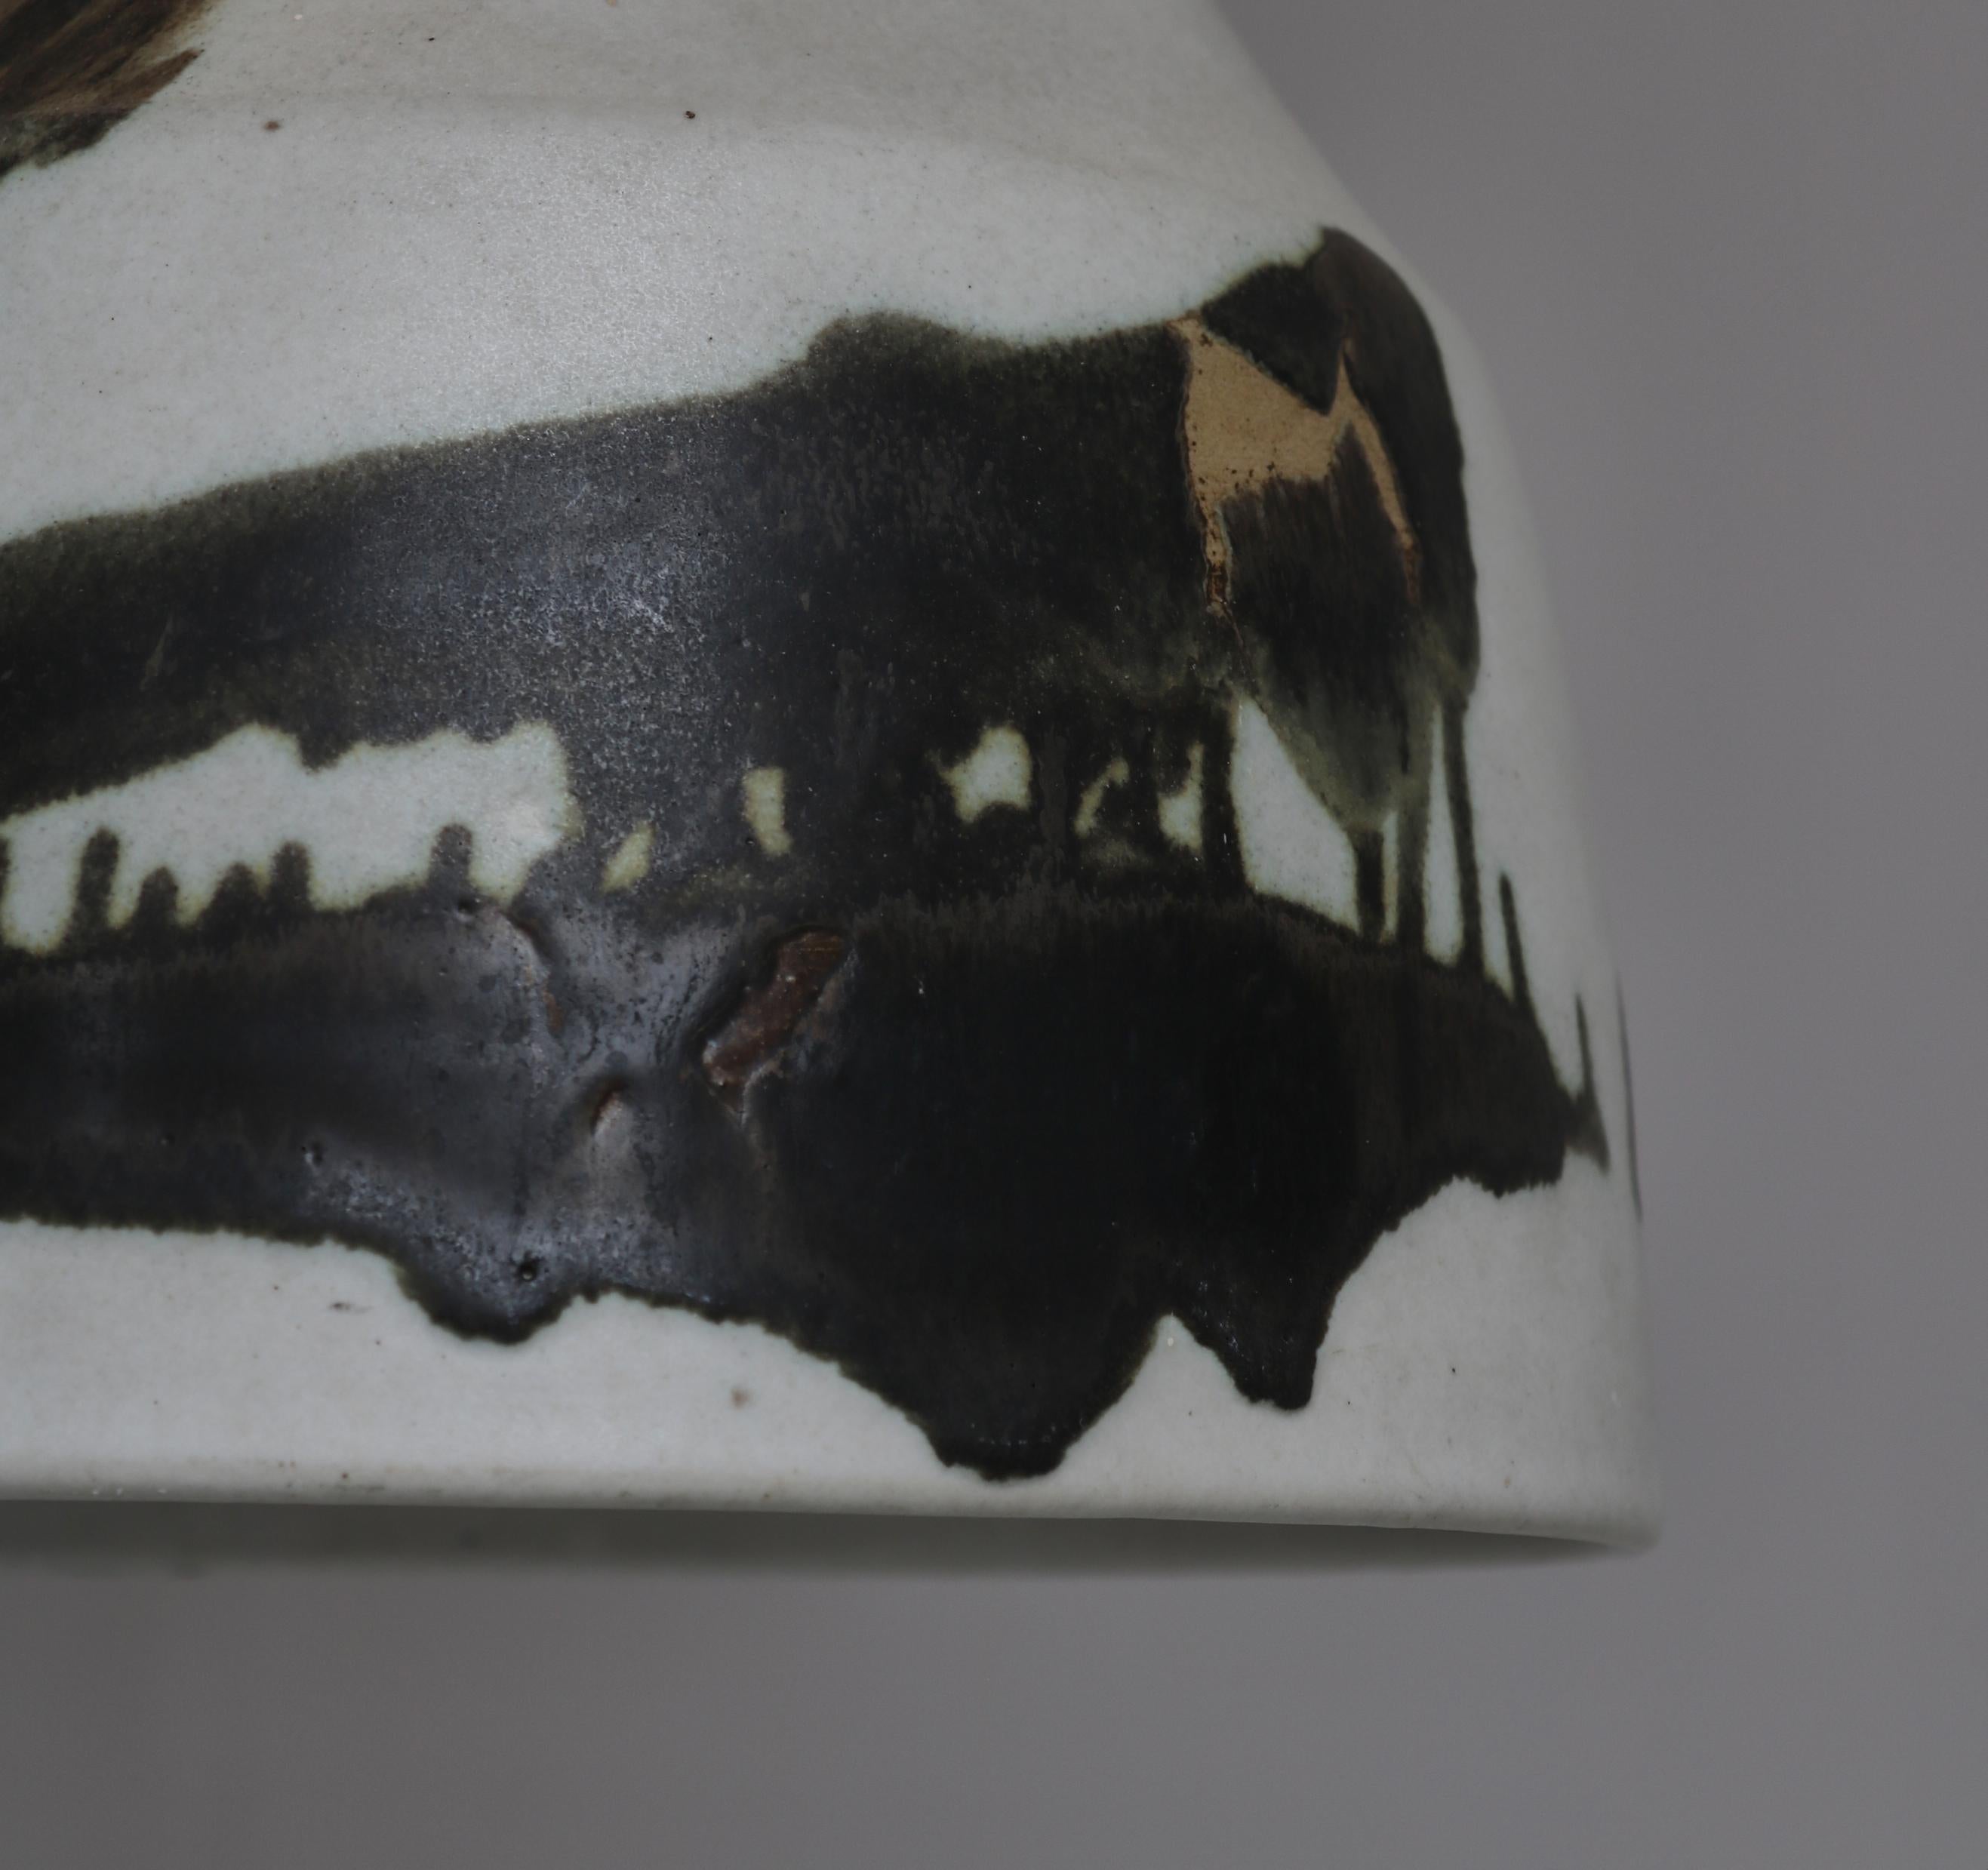 Unique Danish Søholm Stoneware Lamps in Light Glazing and Earth Colors, 1960s For Sale 3